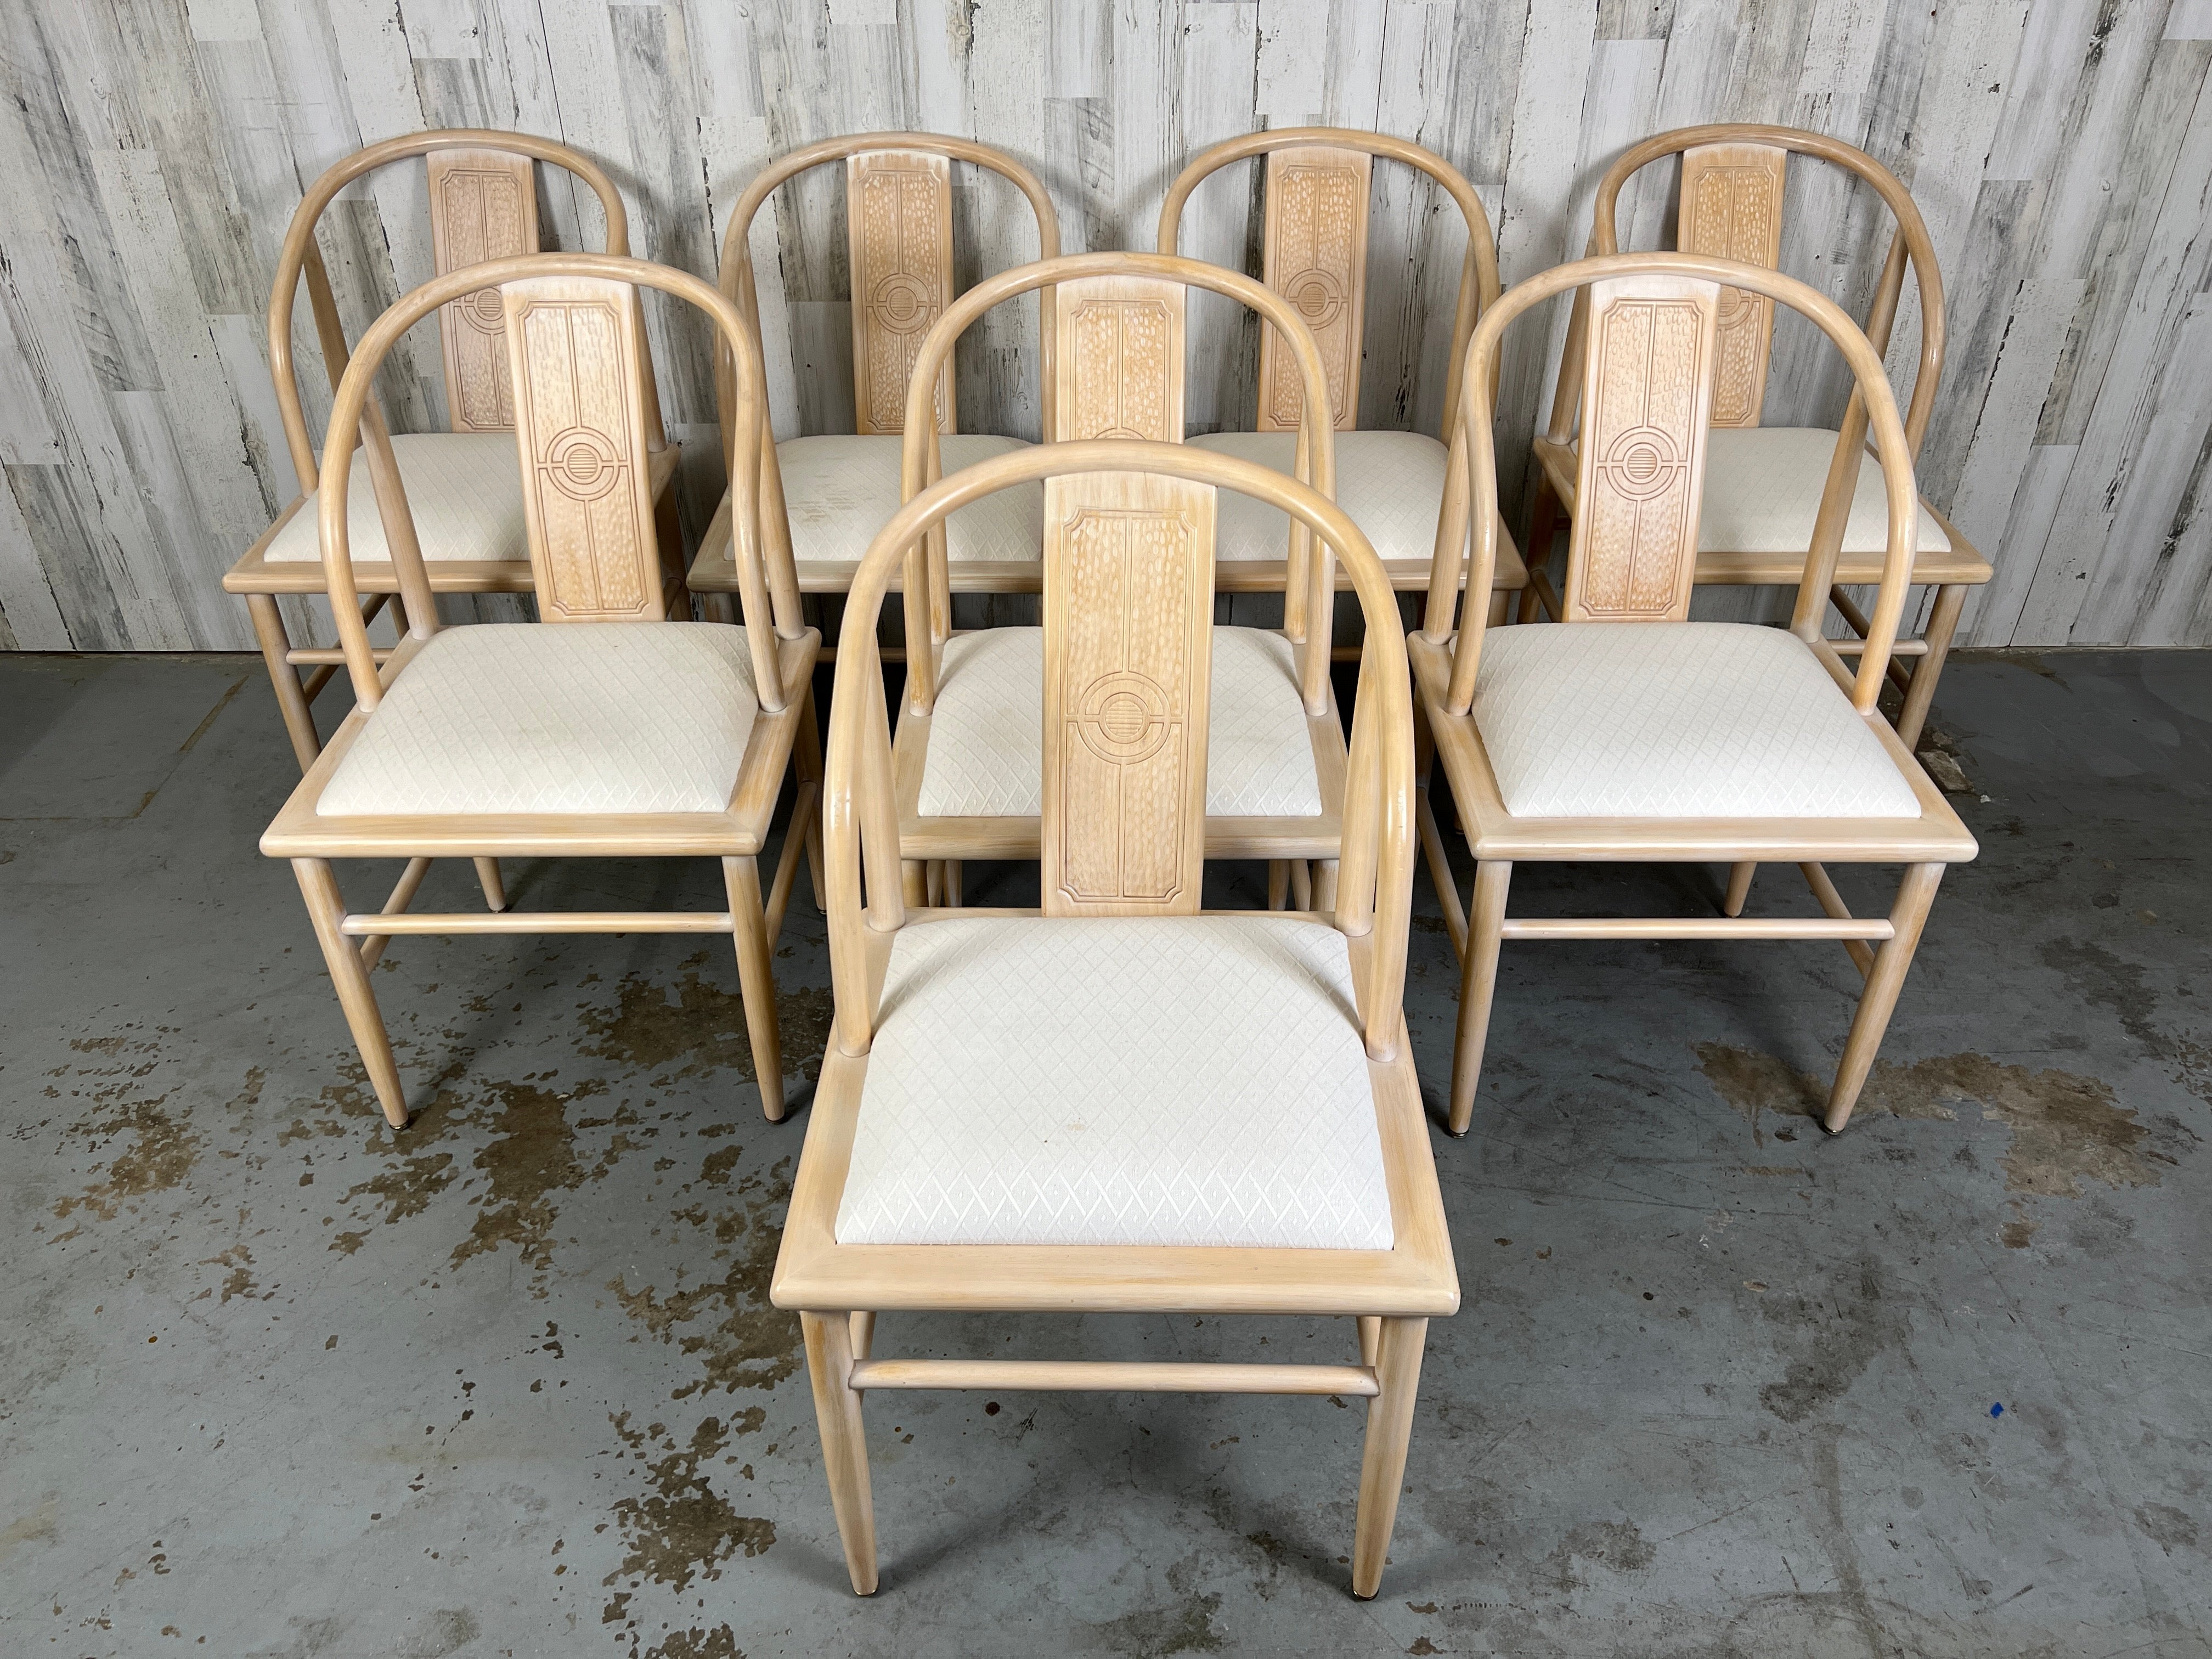 Asian modern horseshoe style dining chairs with an almond cerused finish.
Very comfortable and sturdy. New upholstery is required please see pictures.
 